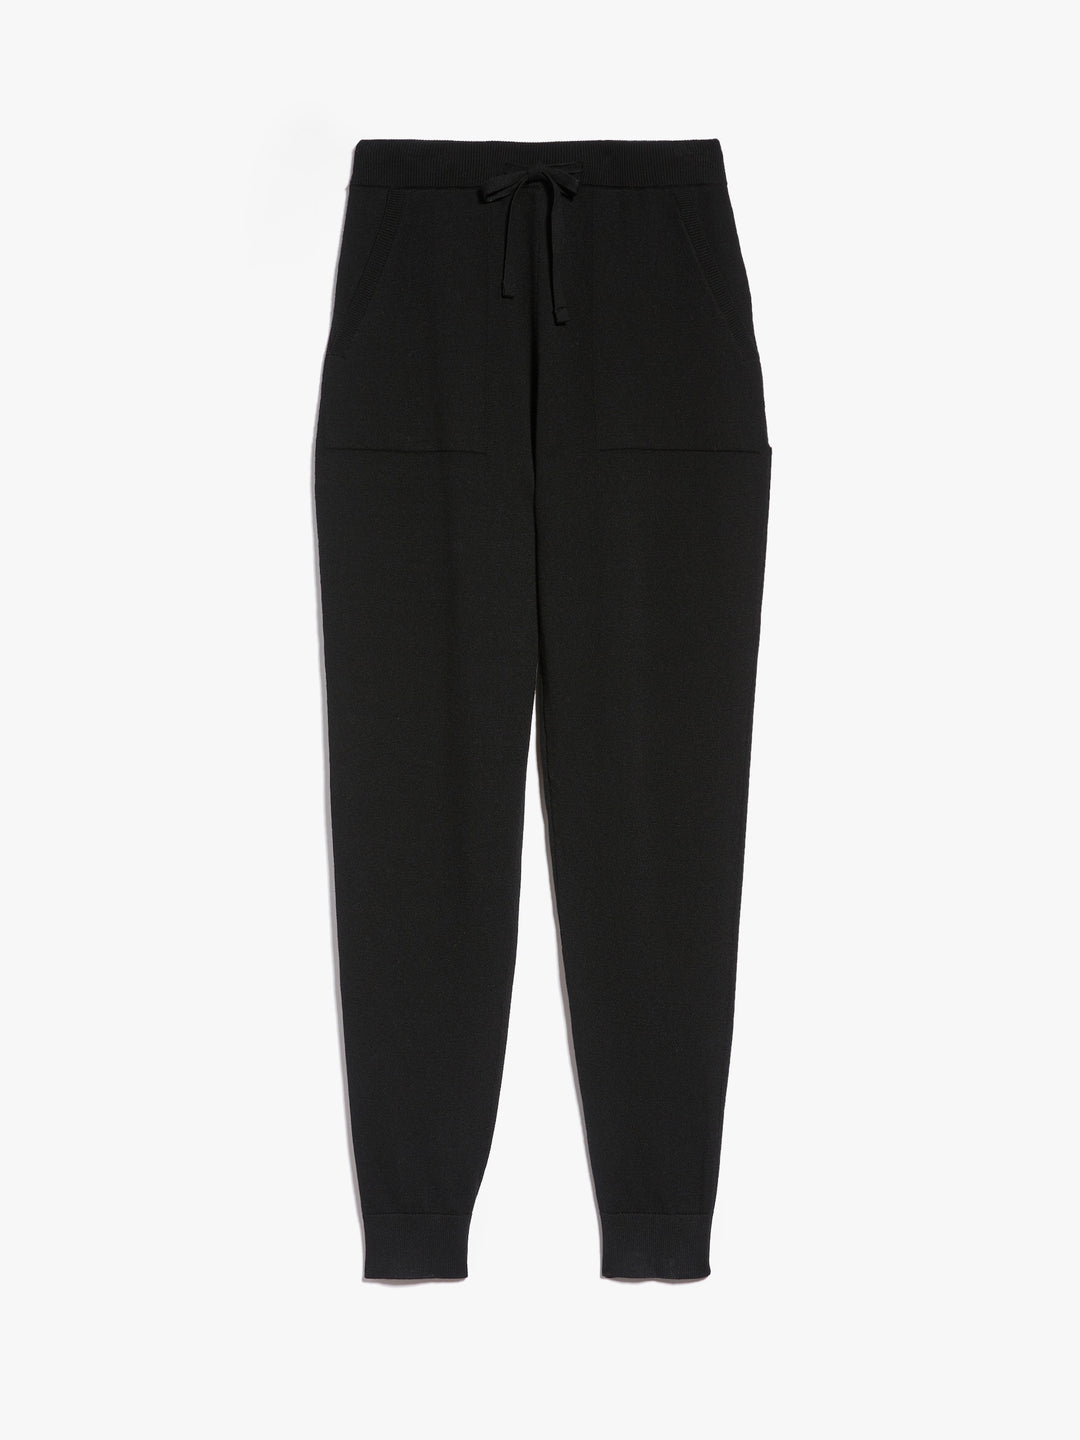 Manager Knit Trousers